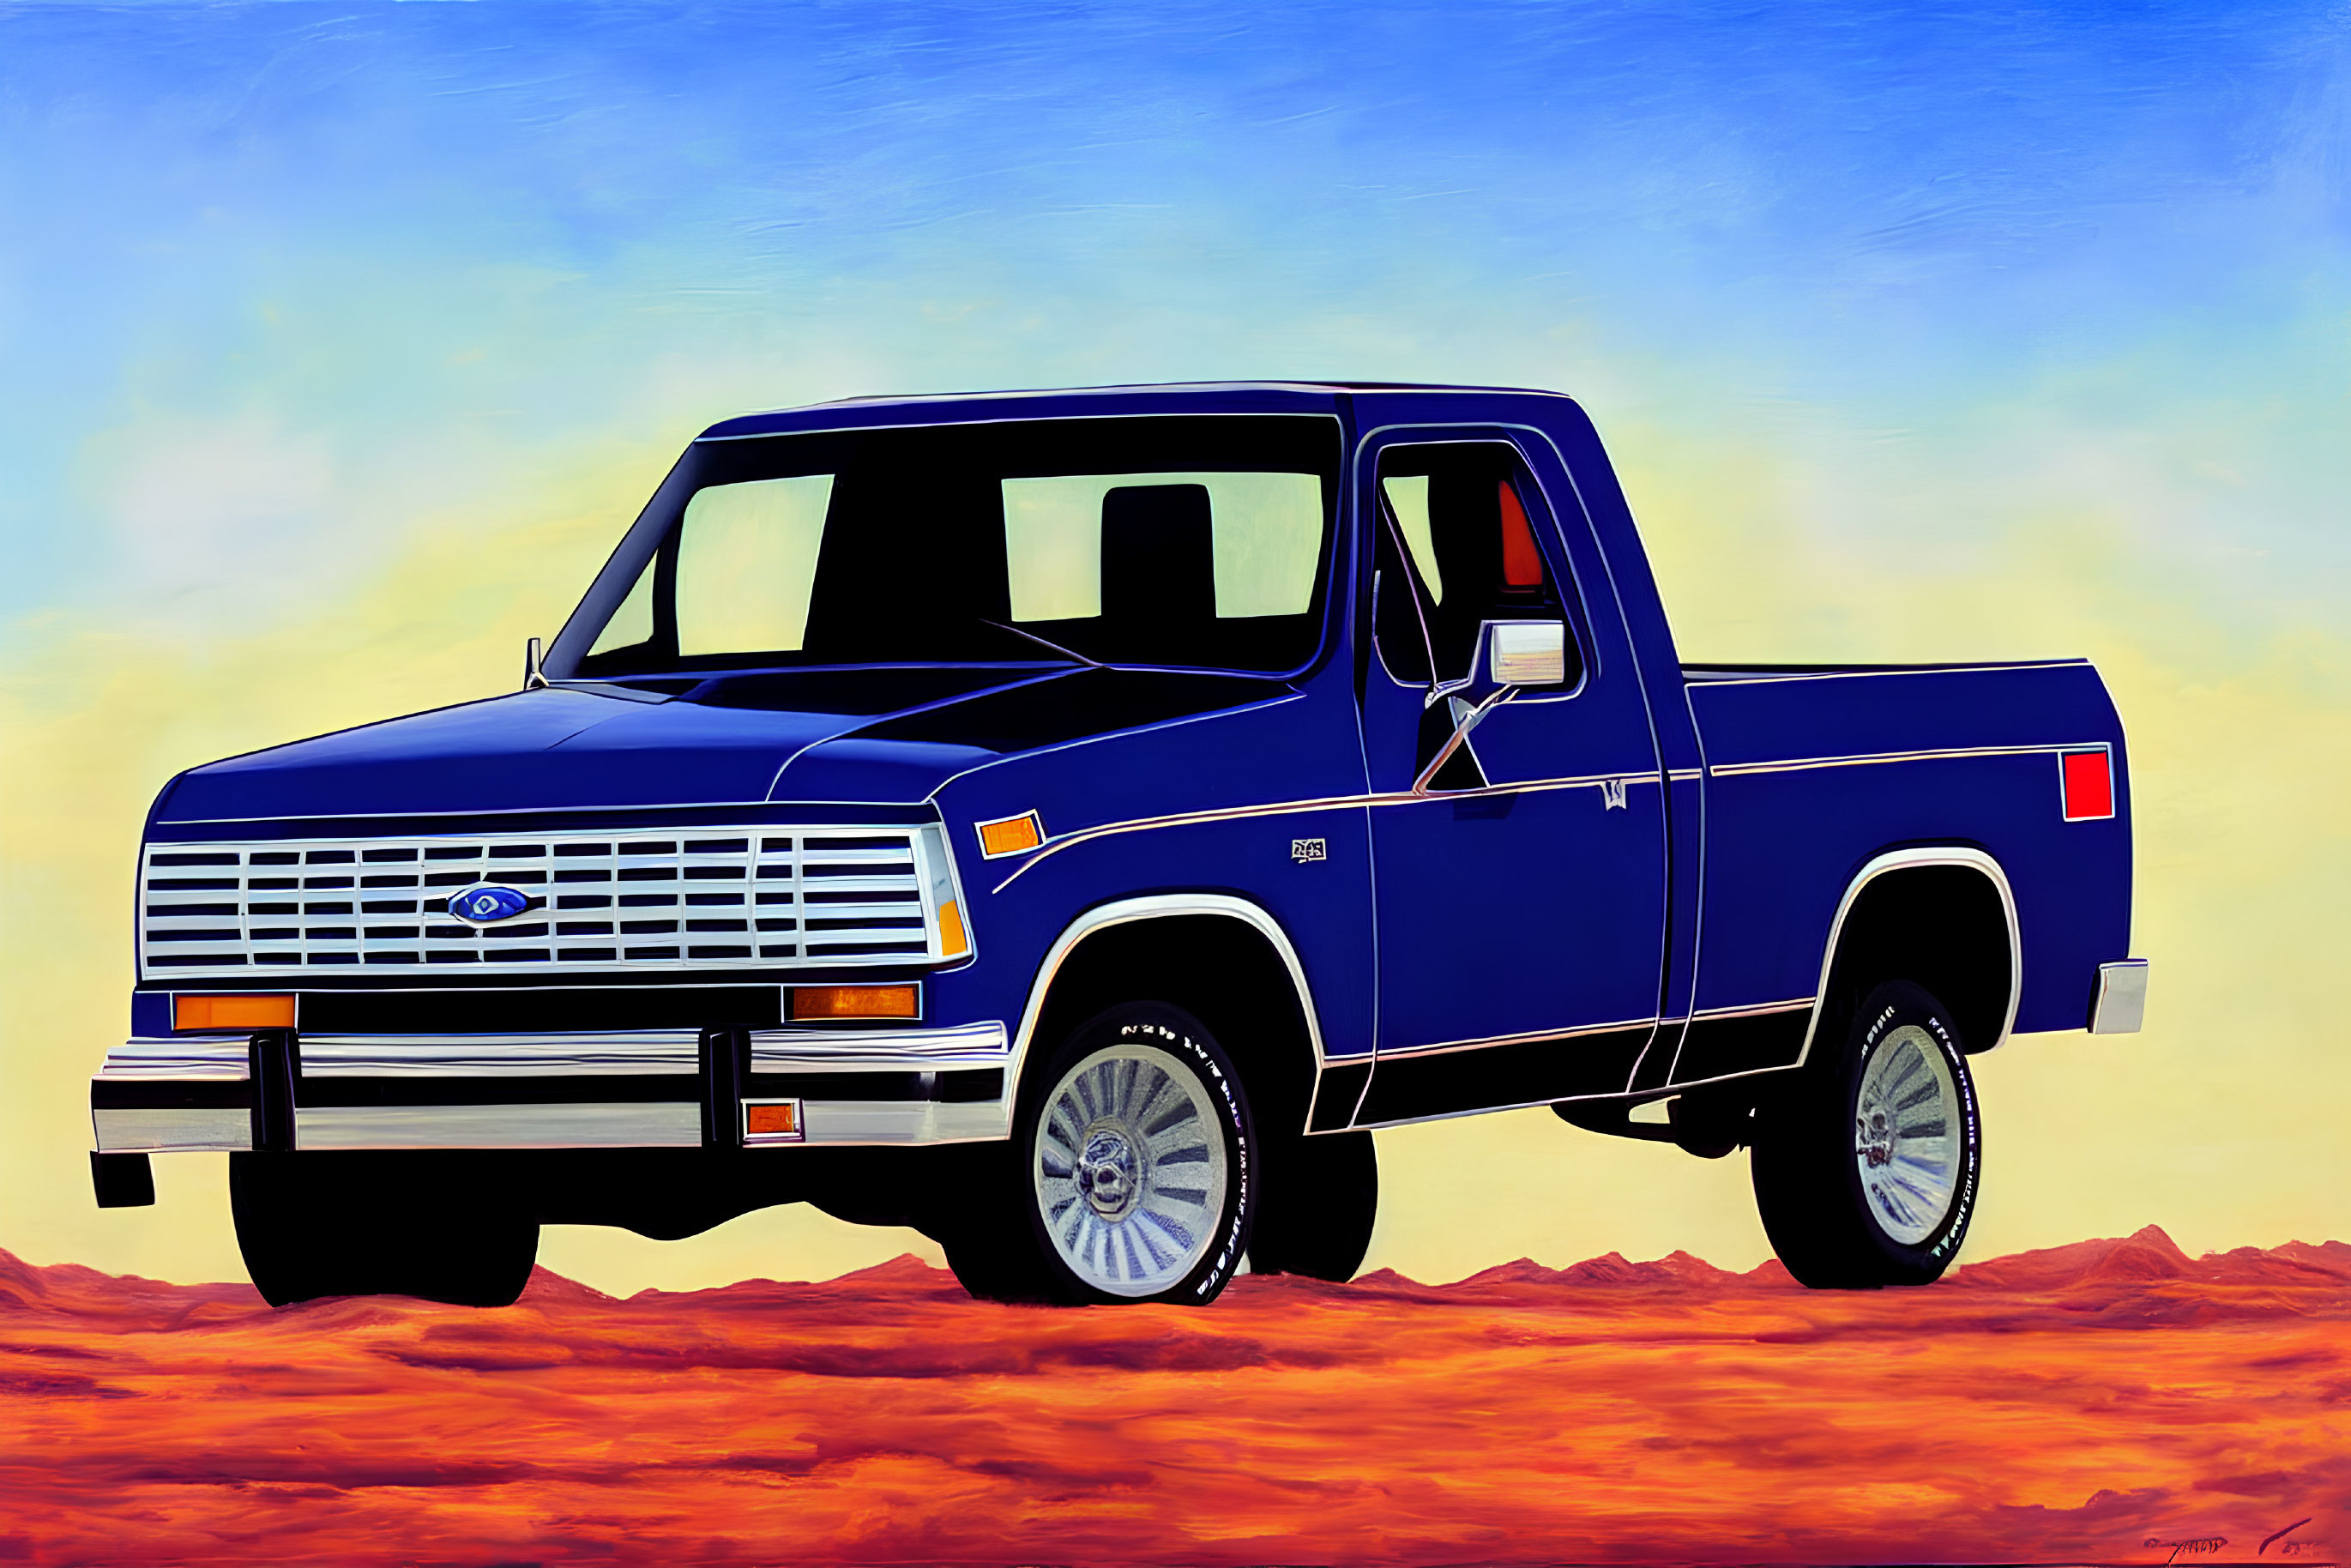 Colorful illustration: Classic blue pickup truck under yellow and blue sky